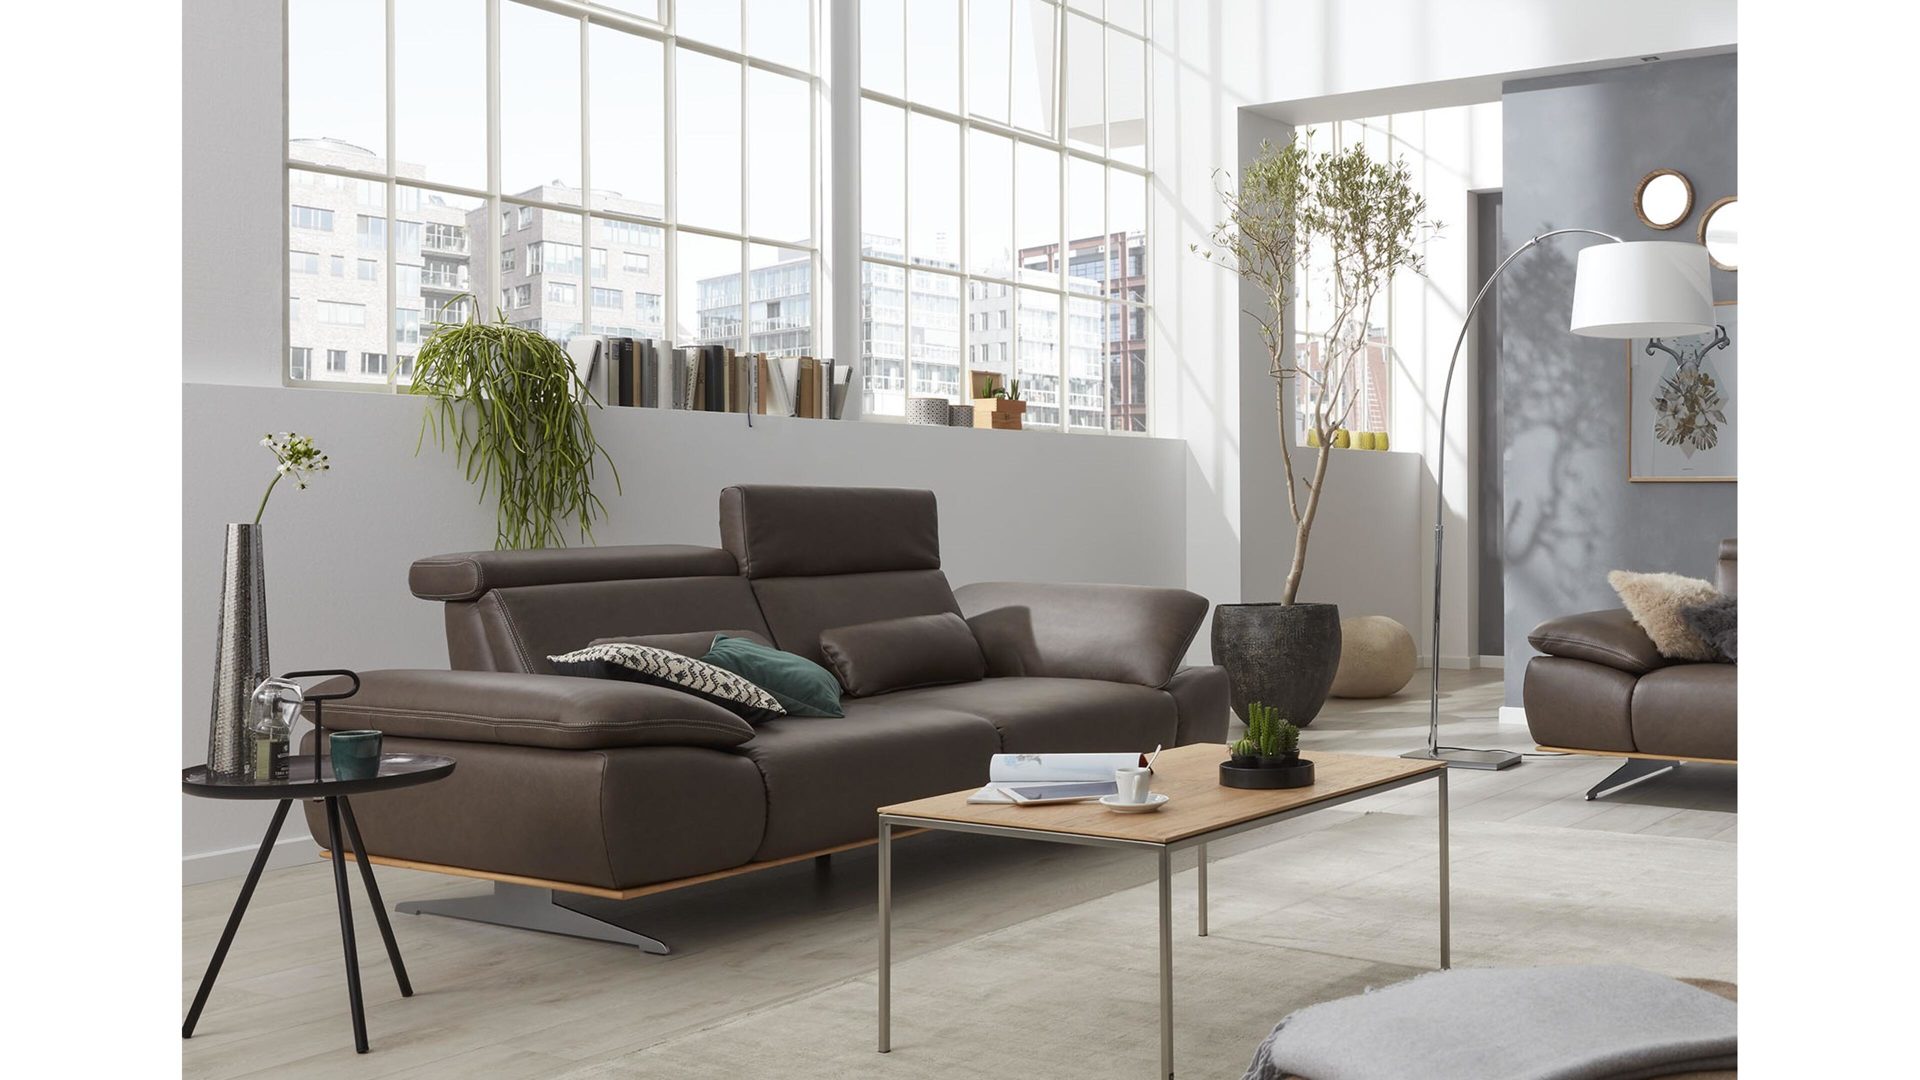 Mobel Eilers Apen Mobel A Z Sofas Couches Interliving